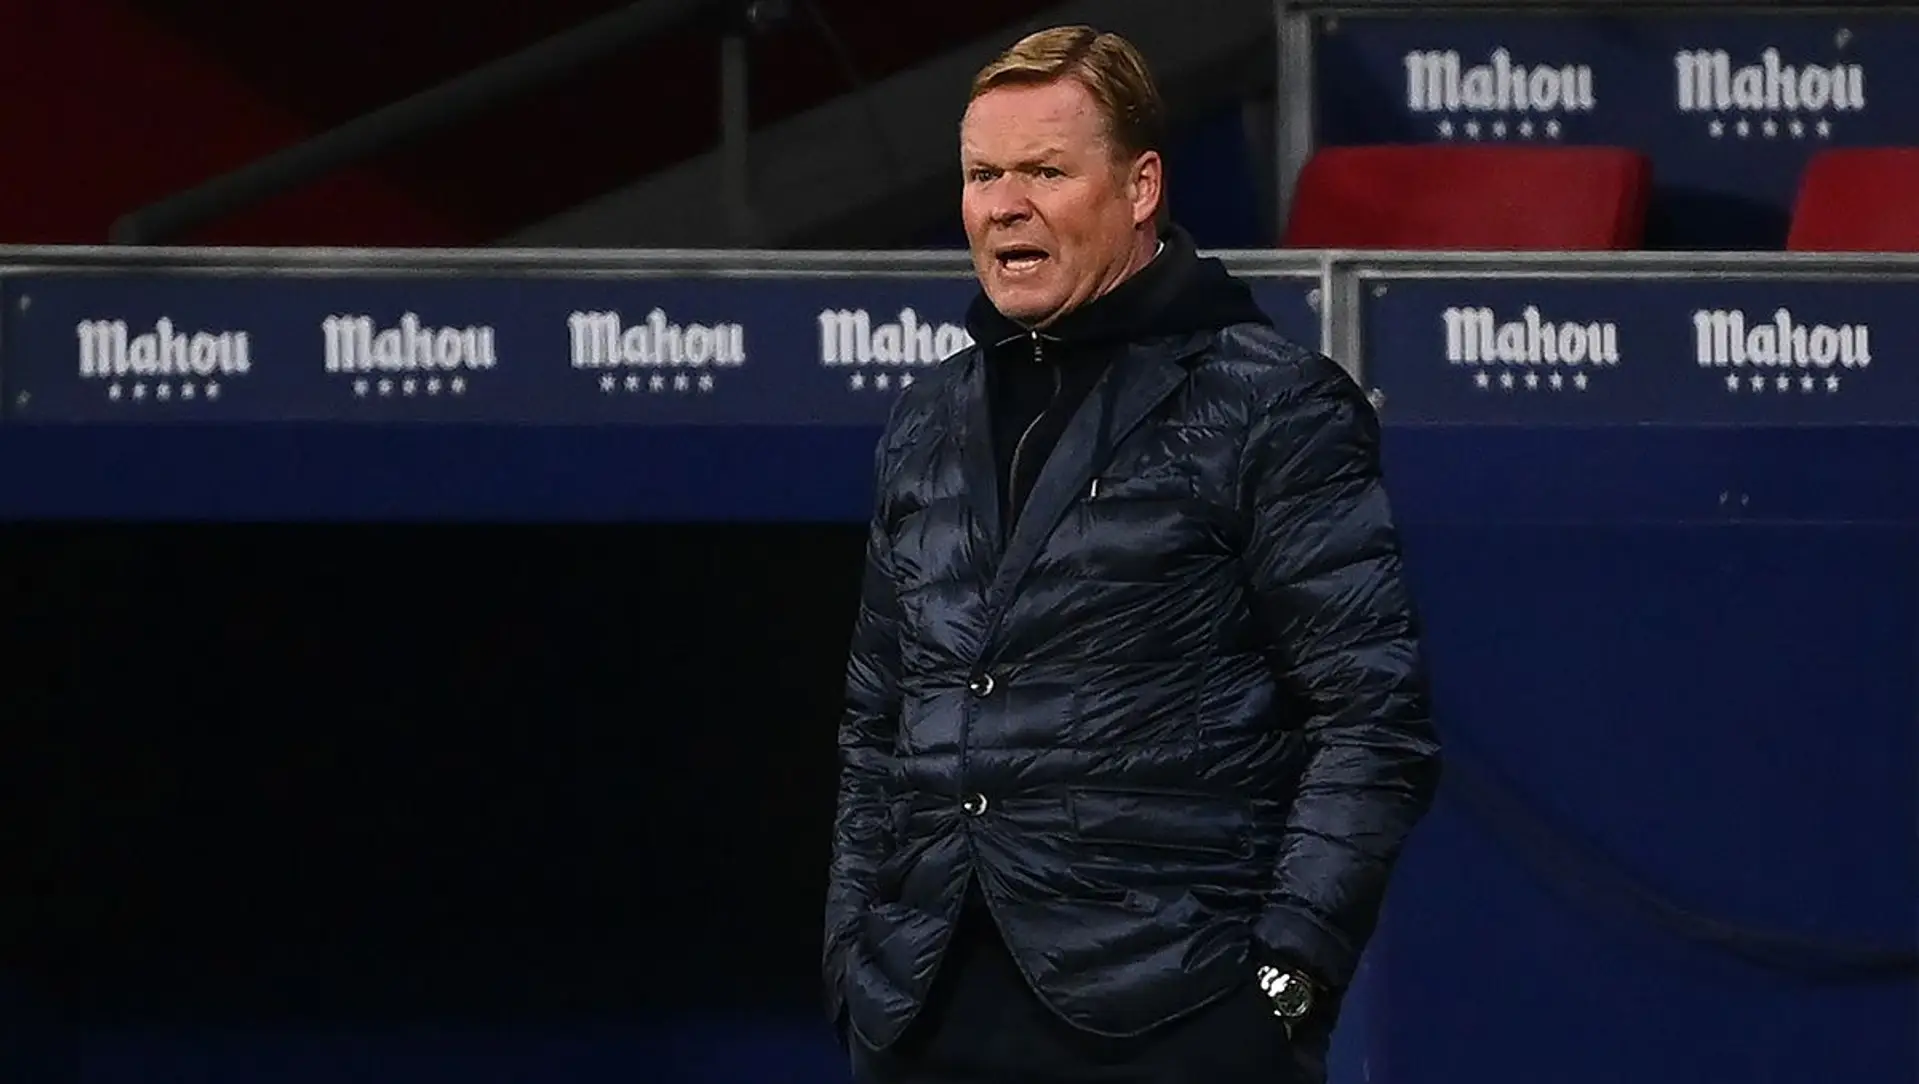 We all saw these injuries coming – Koeman to be blamed for the crisis